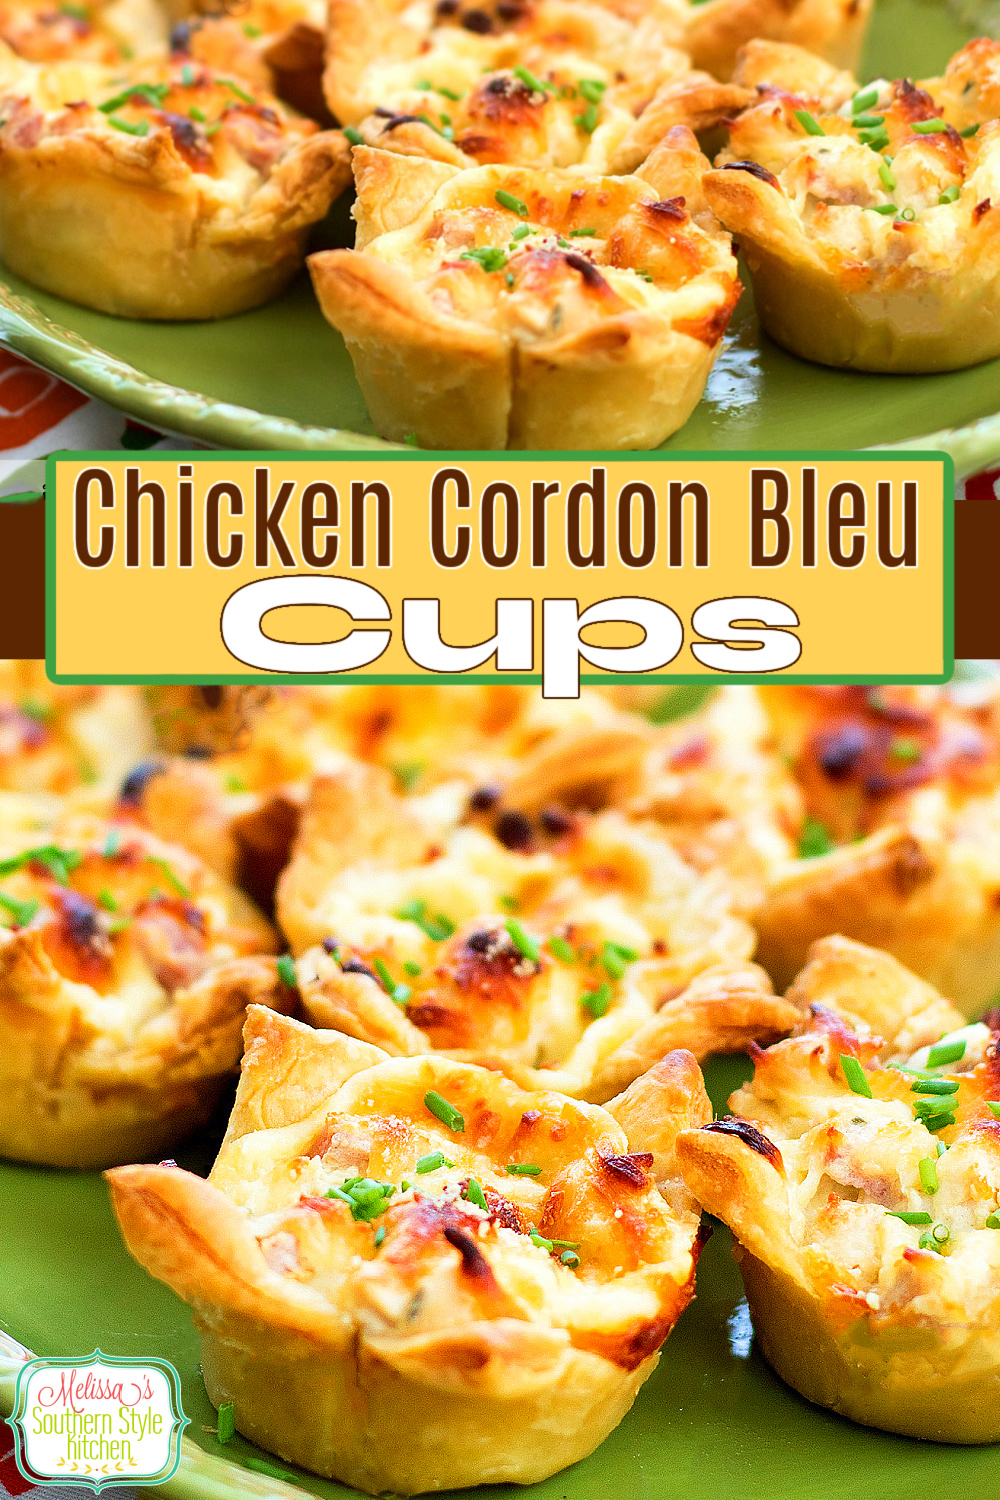 Turn rotisserie chicken and puff pastry into these individual sized Chicken Cordon Bleu Cups #chickenrecipes #chickencordonbleu #puffpastryrecipes #ham #easychickenrecipes #rotisseriechicken #appetizers #dinner #dinnerideas #southernfood #southernrecipes via @melissasssk